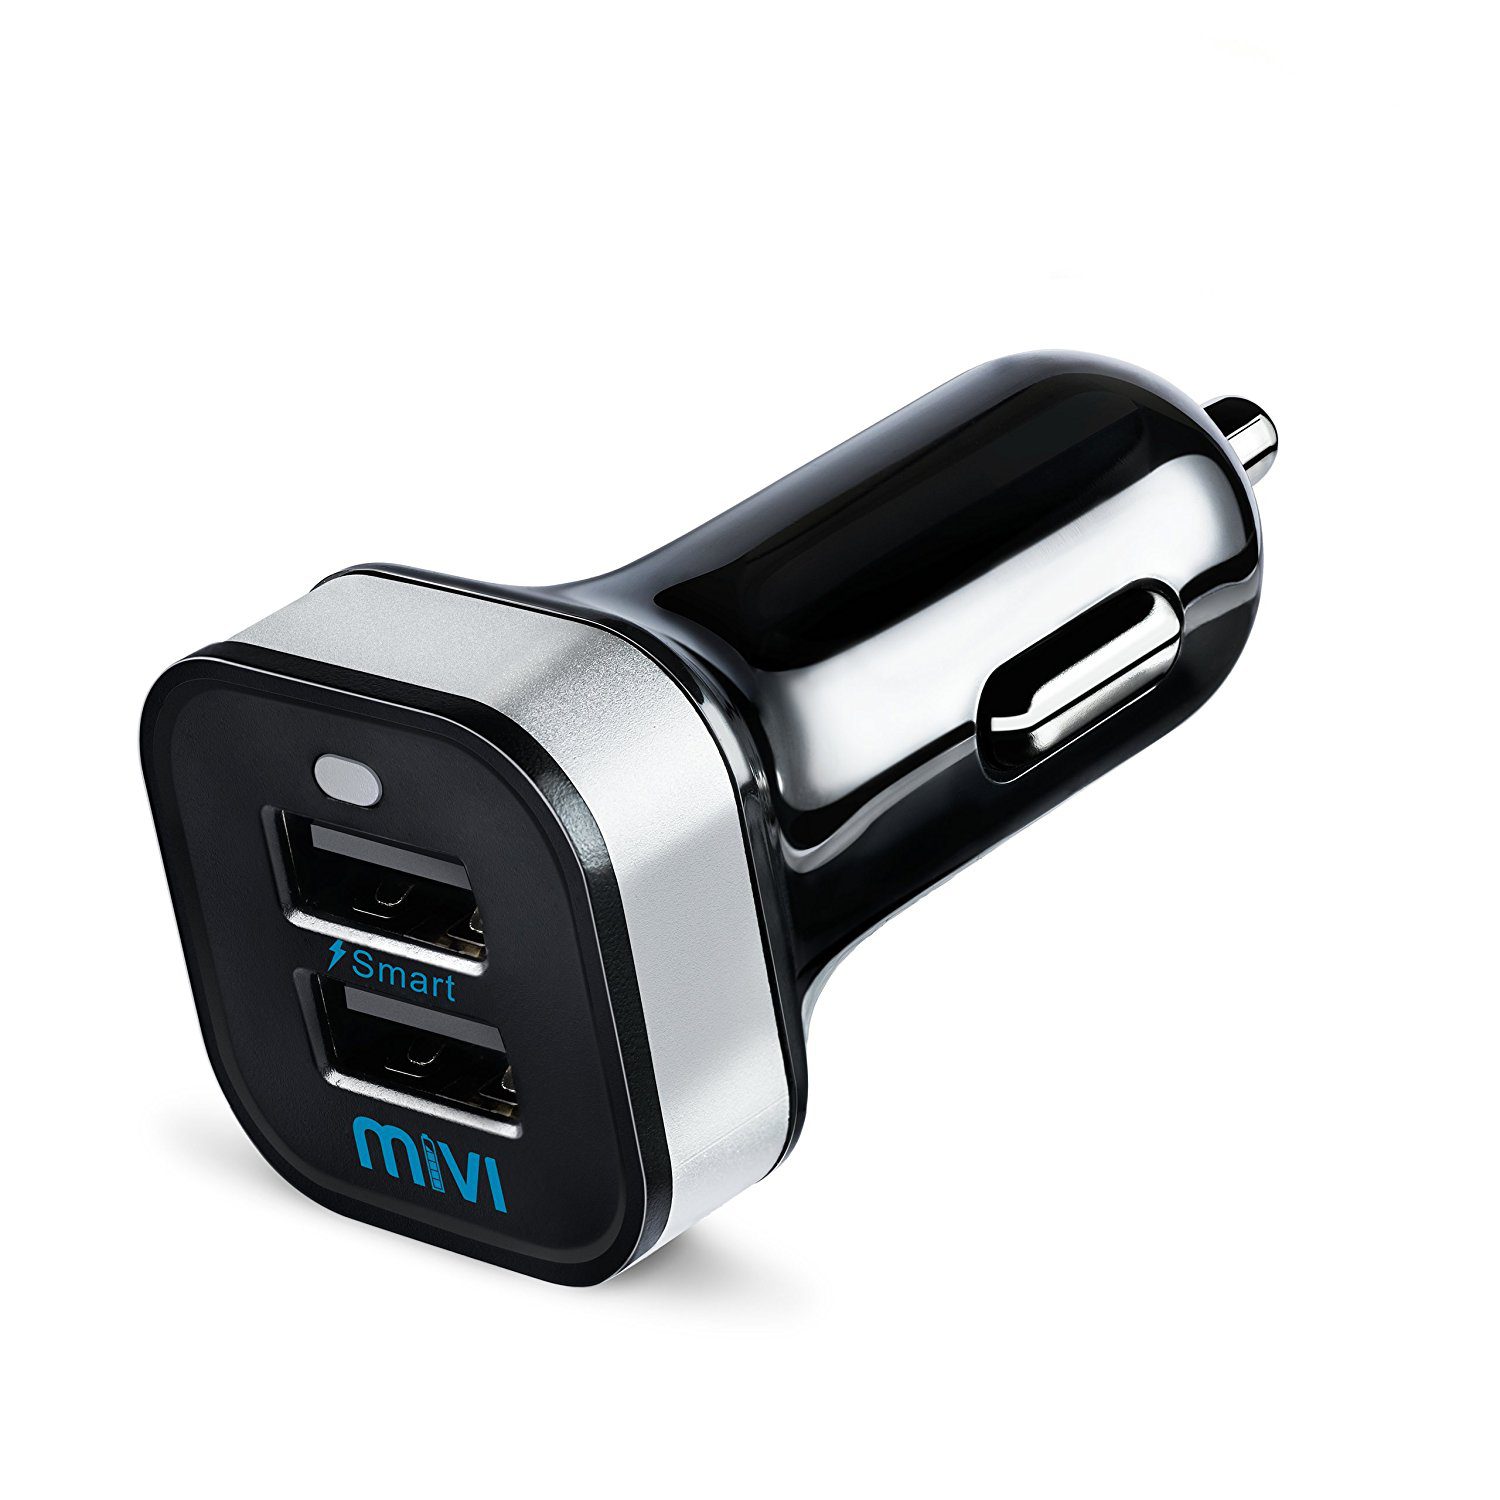 Mivi smart charge 3.1a dual port car charger for all smart mobile devices and tablets